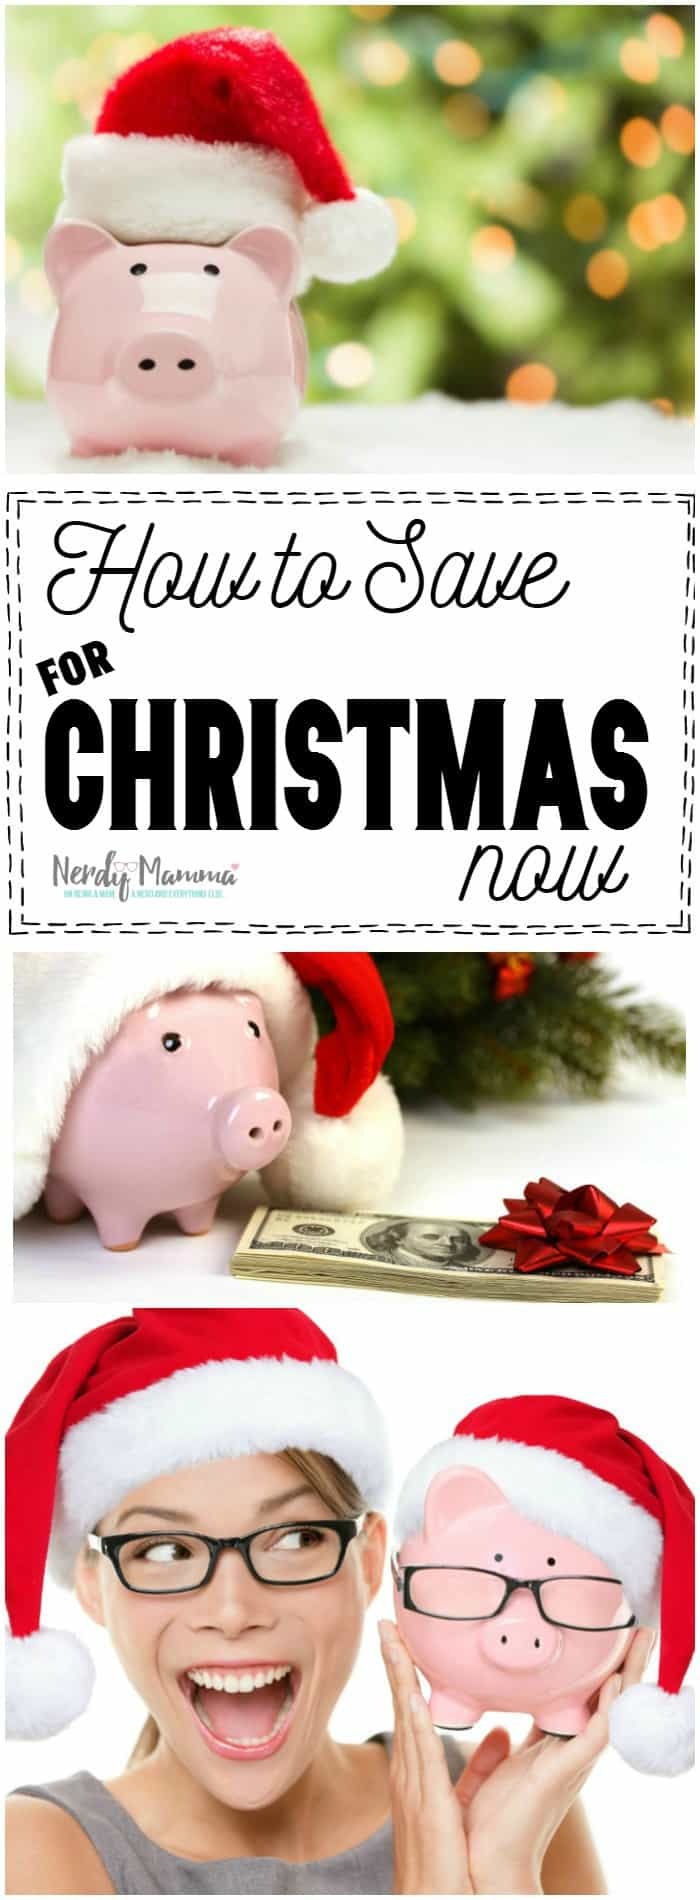 How to save for Christmas NOW. I don't want to wait until the last minute again! Saving this list to and getting started on saving today.